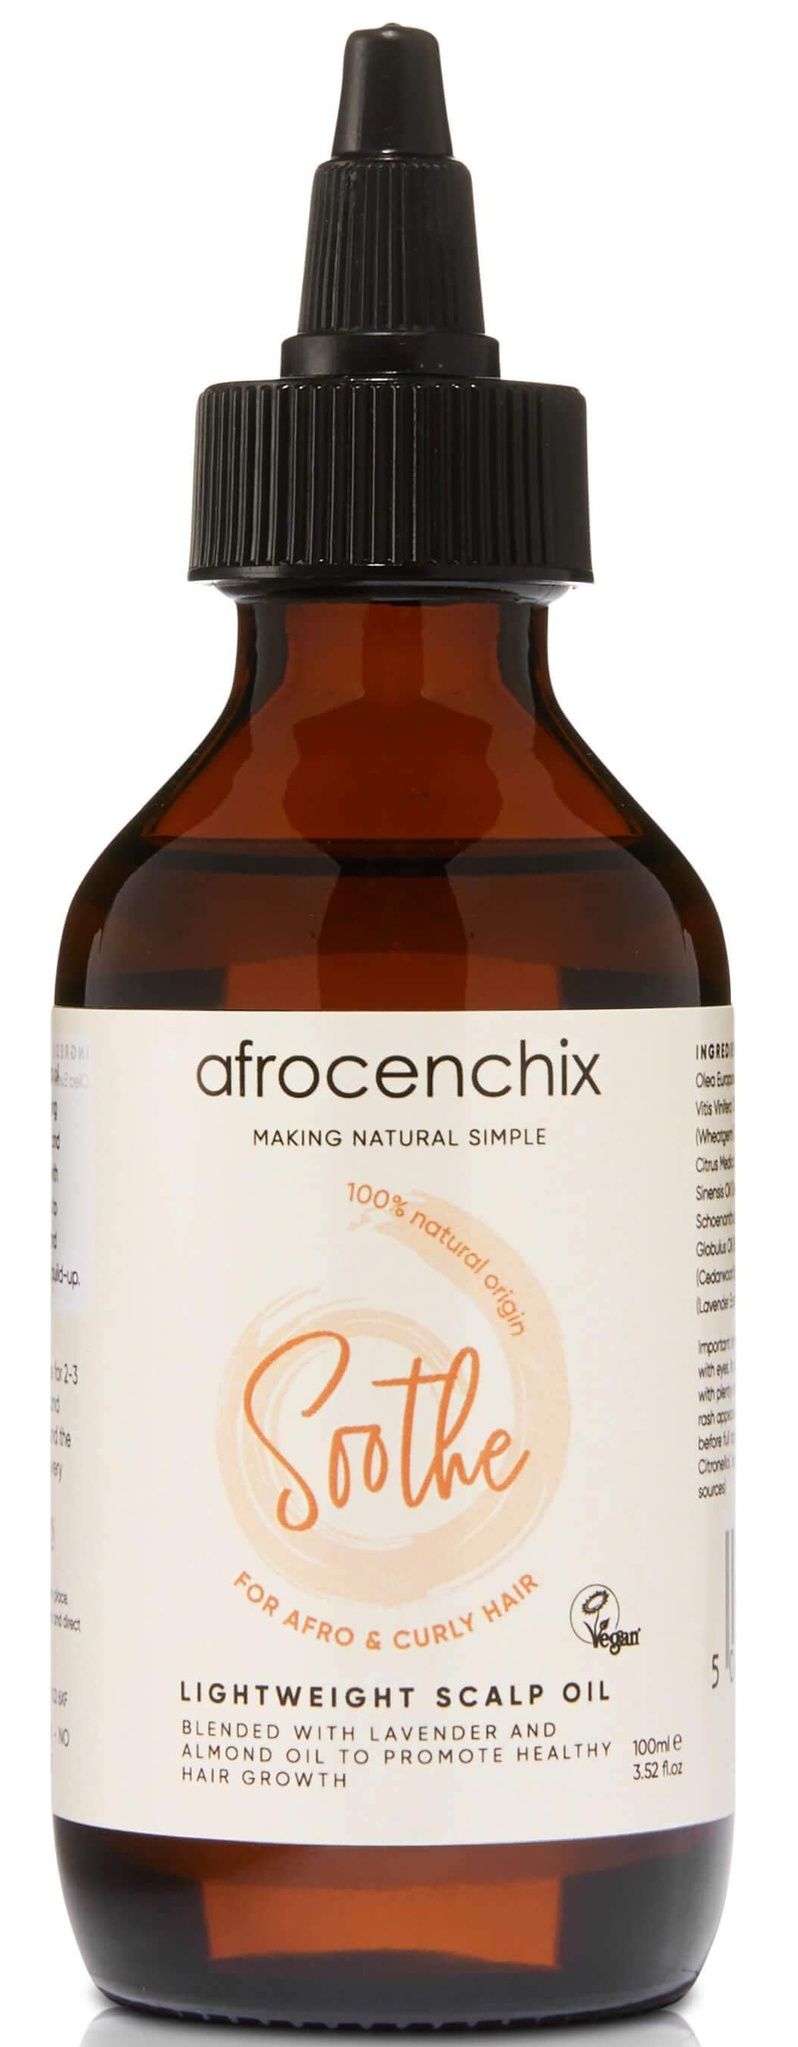 Afrocenchix Soothe